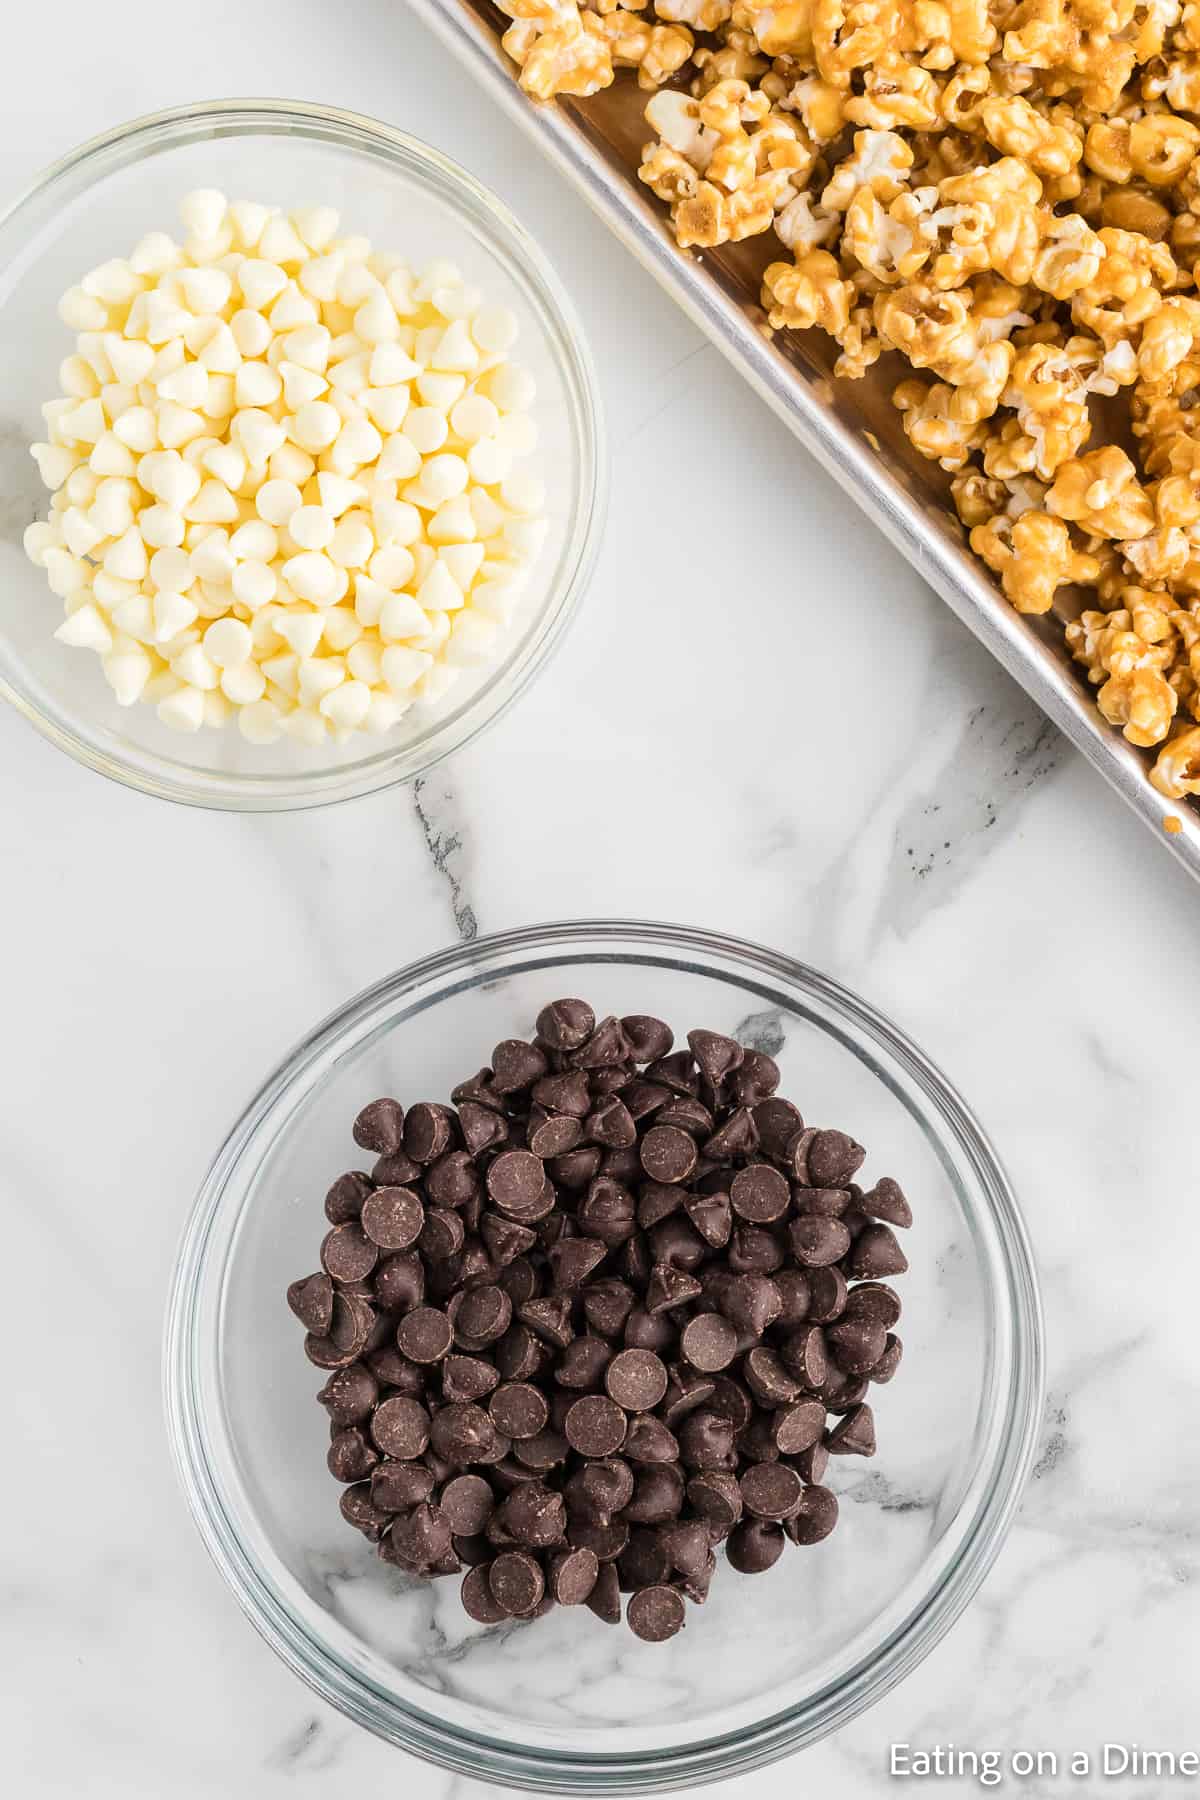 Bowl of chocolate chips with a baking sheet of popcorn on the side